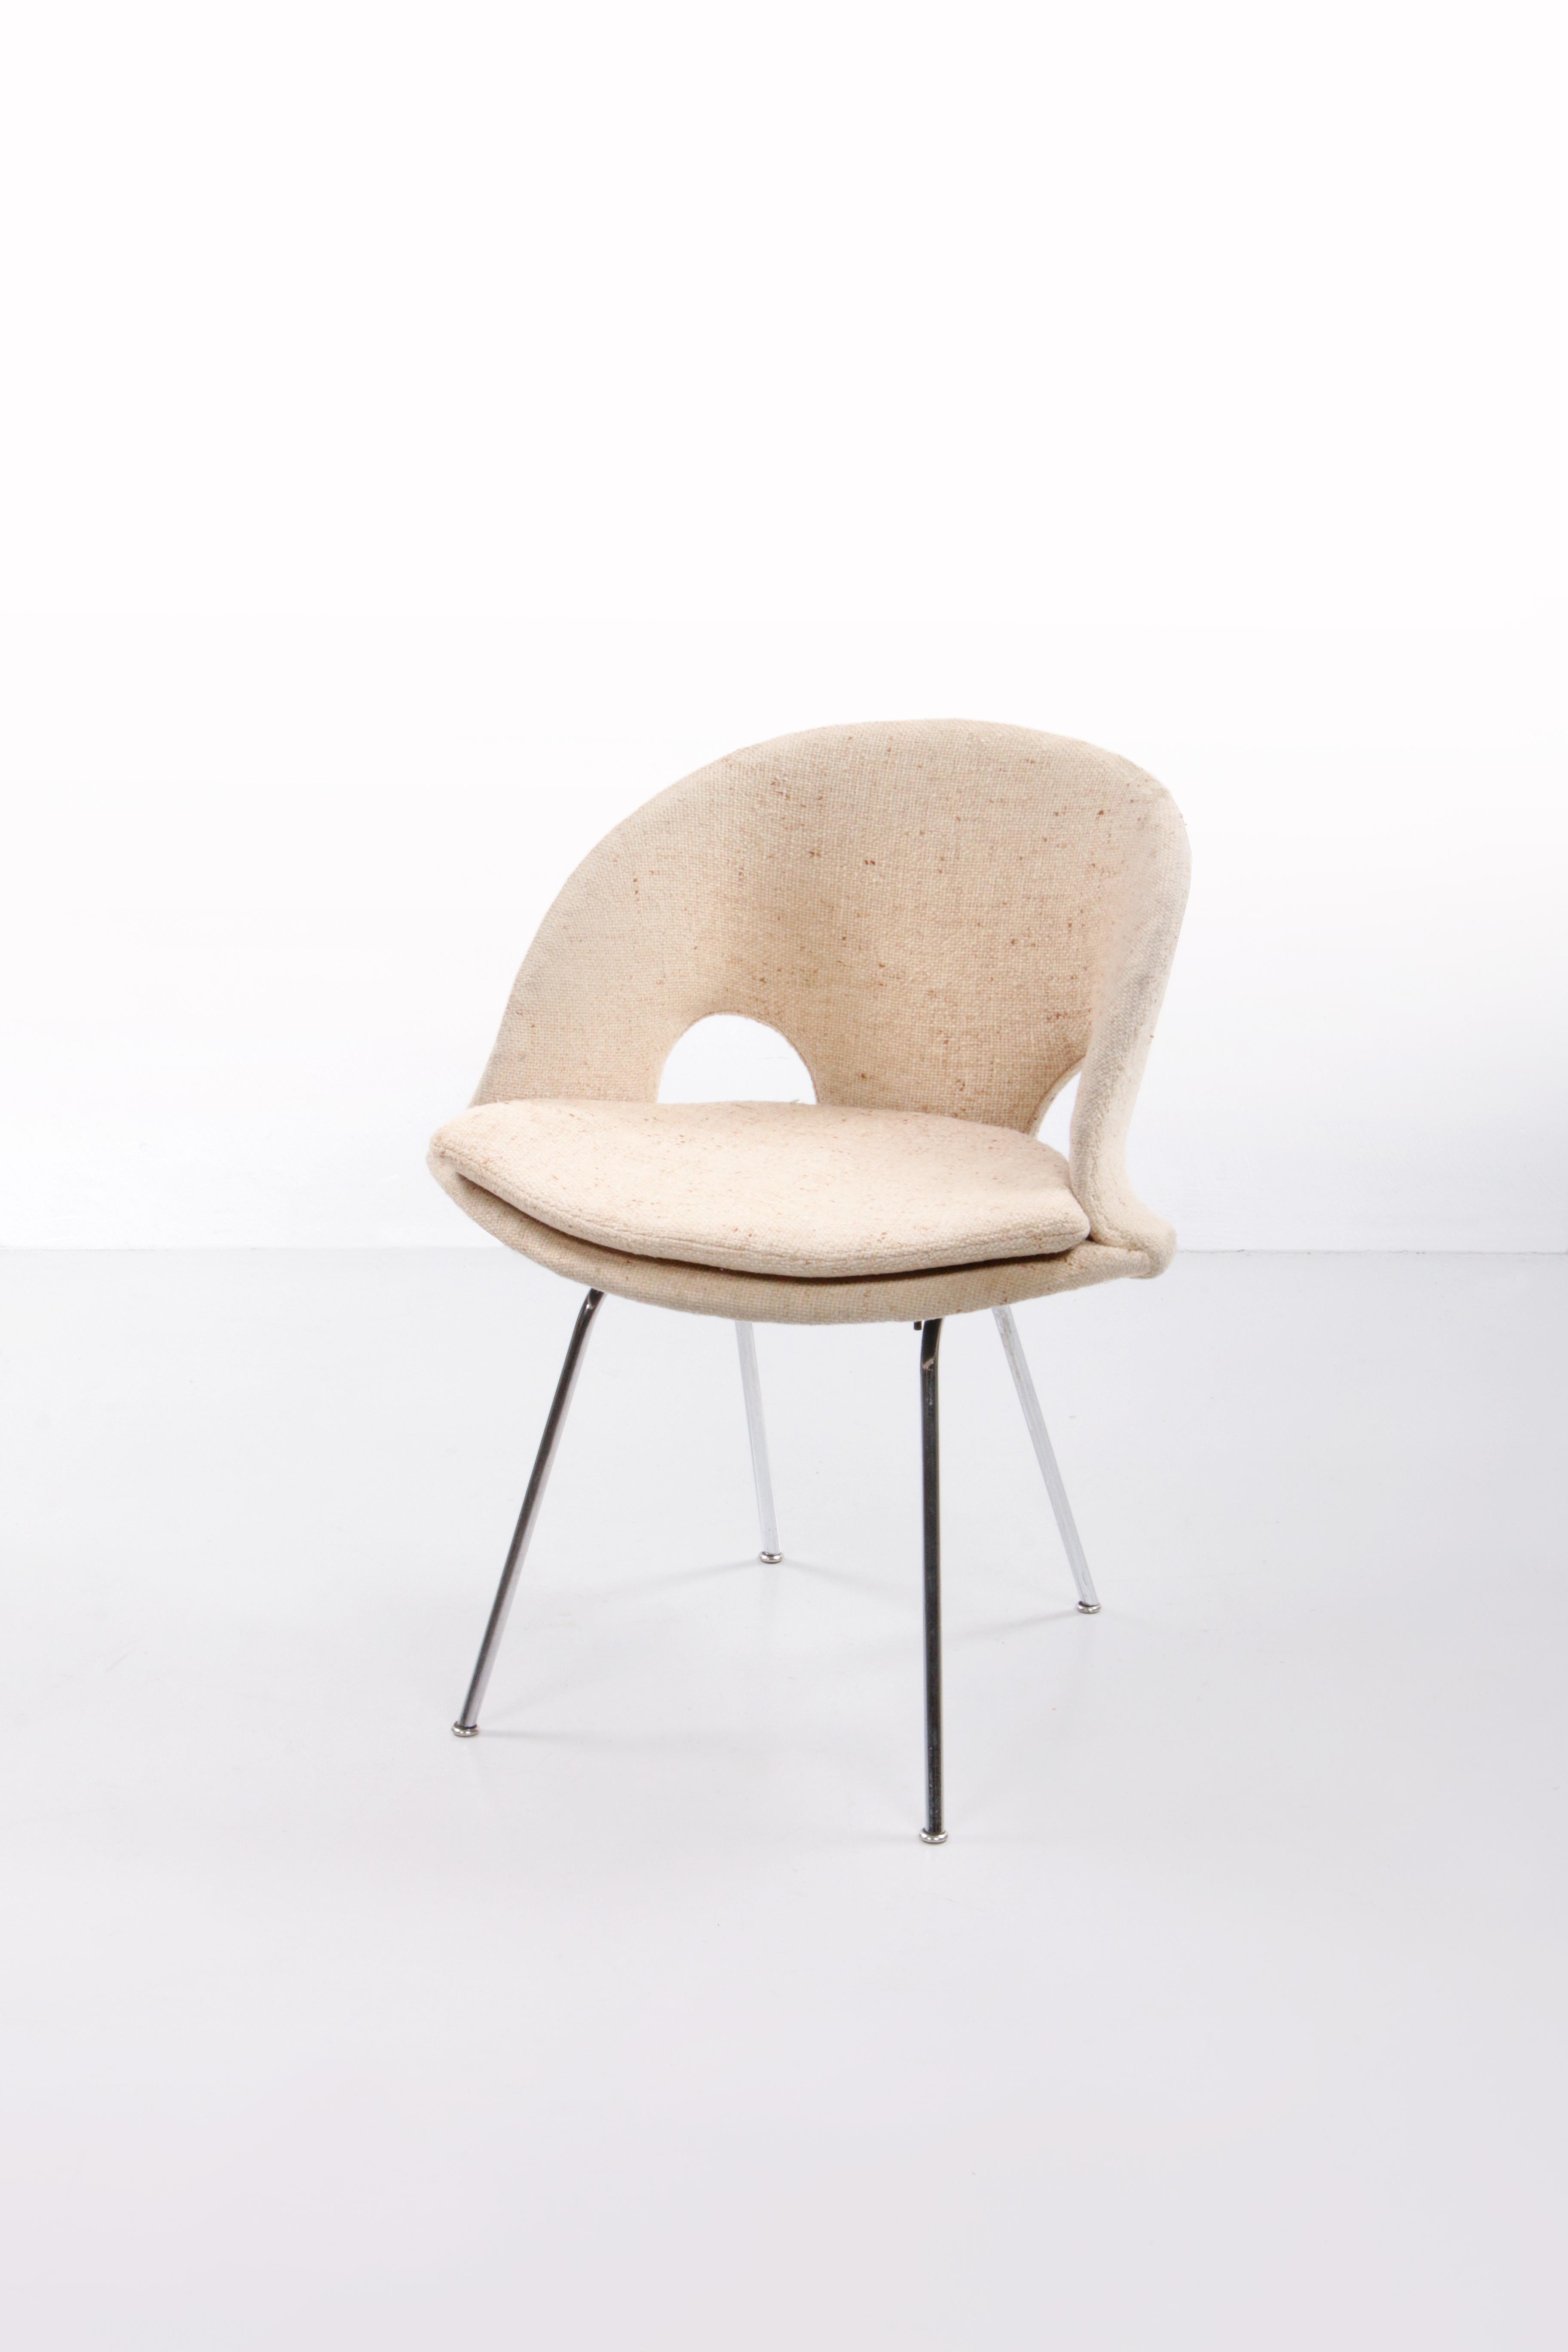 Walter Knoll Lounge Chair by Arno Votteler Model 350, 1950s For Sale 3